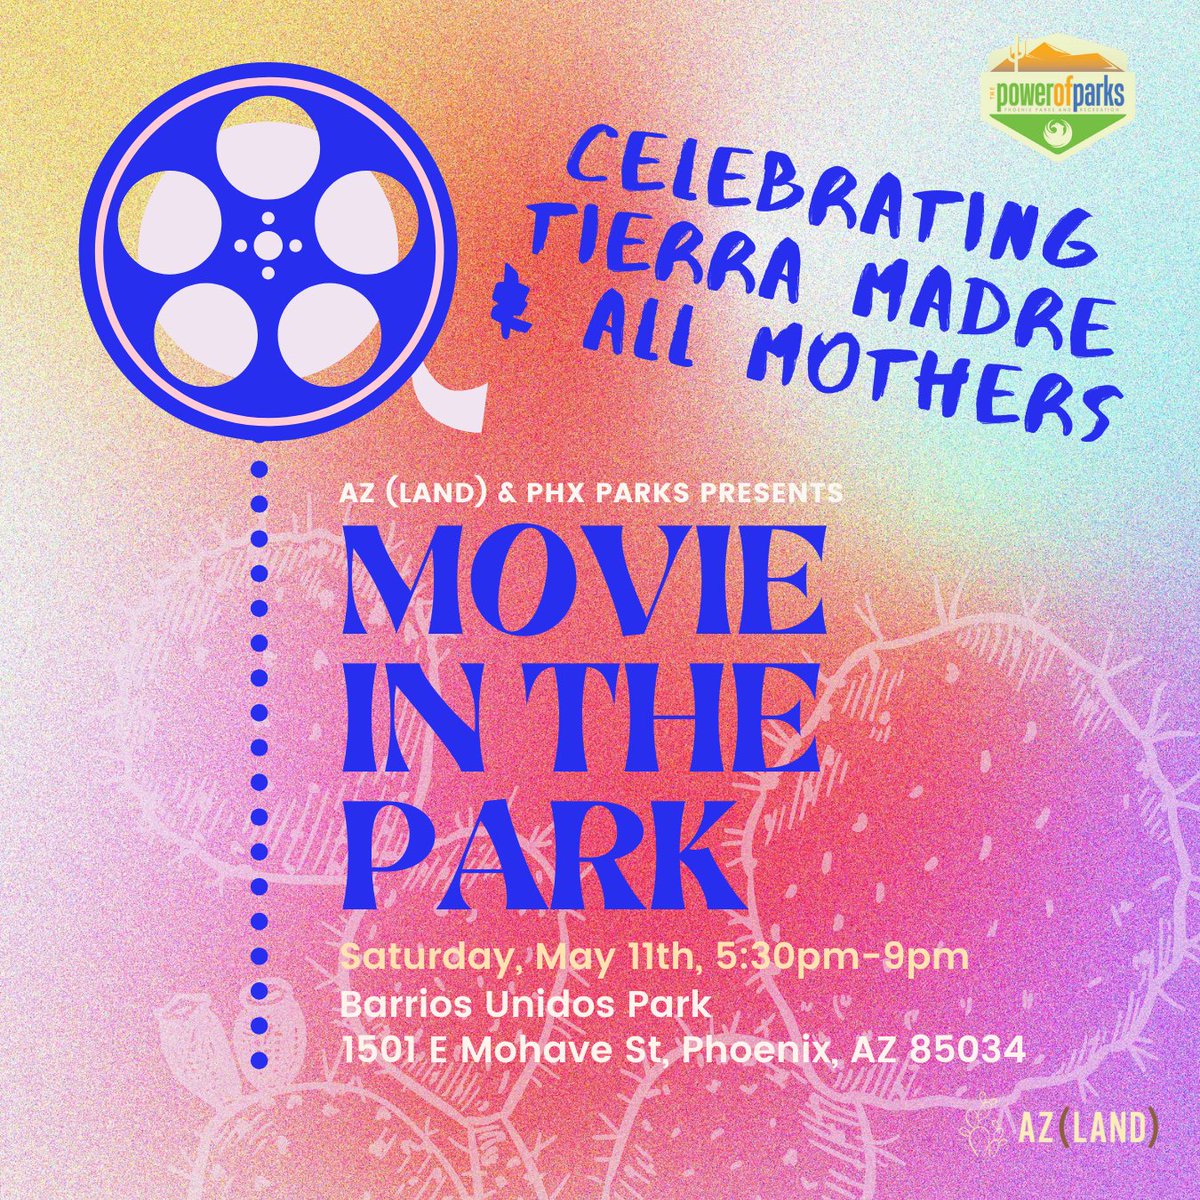 🌟📽️🌎 Lights, camera, sunsets! Let's honor all mothers & Tierra Madre with a magical evening under the stars at this upcoming, Movie in The Park event, presented by AZ (Land) & PHX Parks & Recreation 🌅💐🍿 📍1501 E Mohave St 🗓️ May 11th, 5:30pm - 9pm